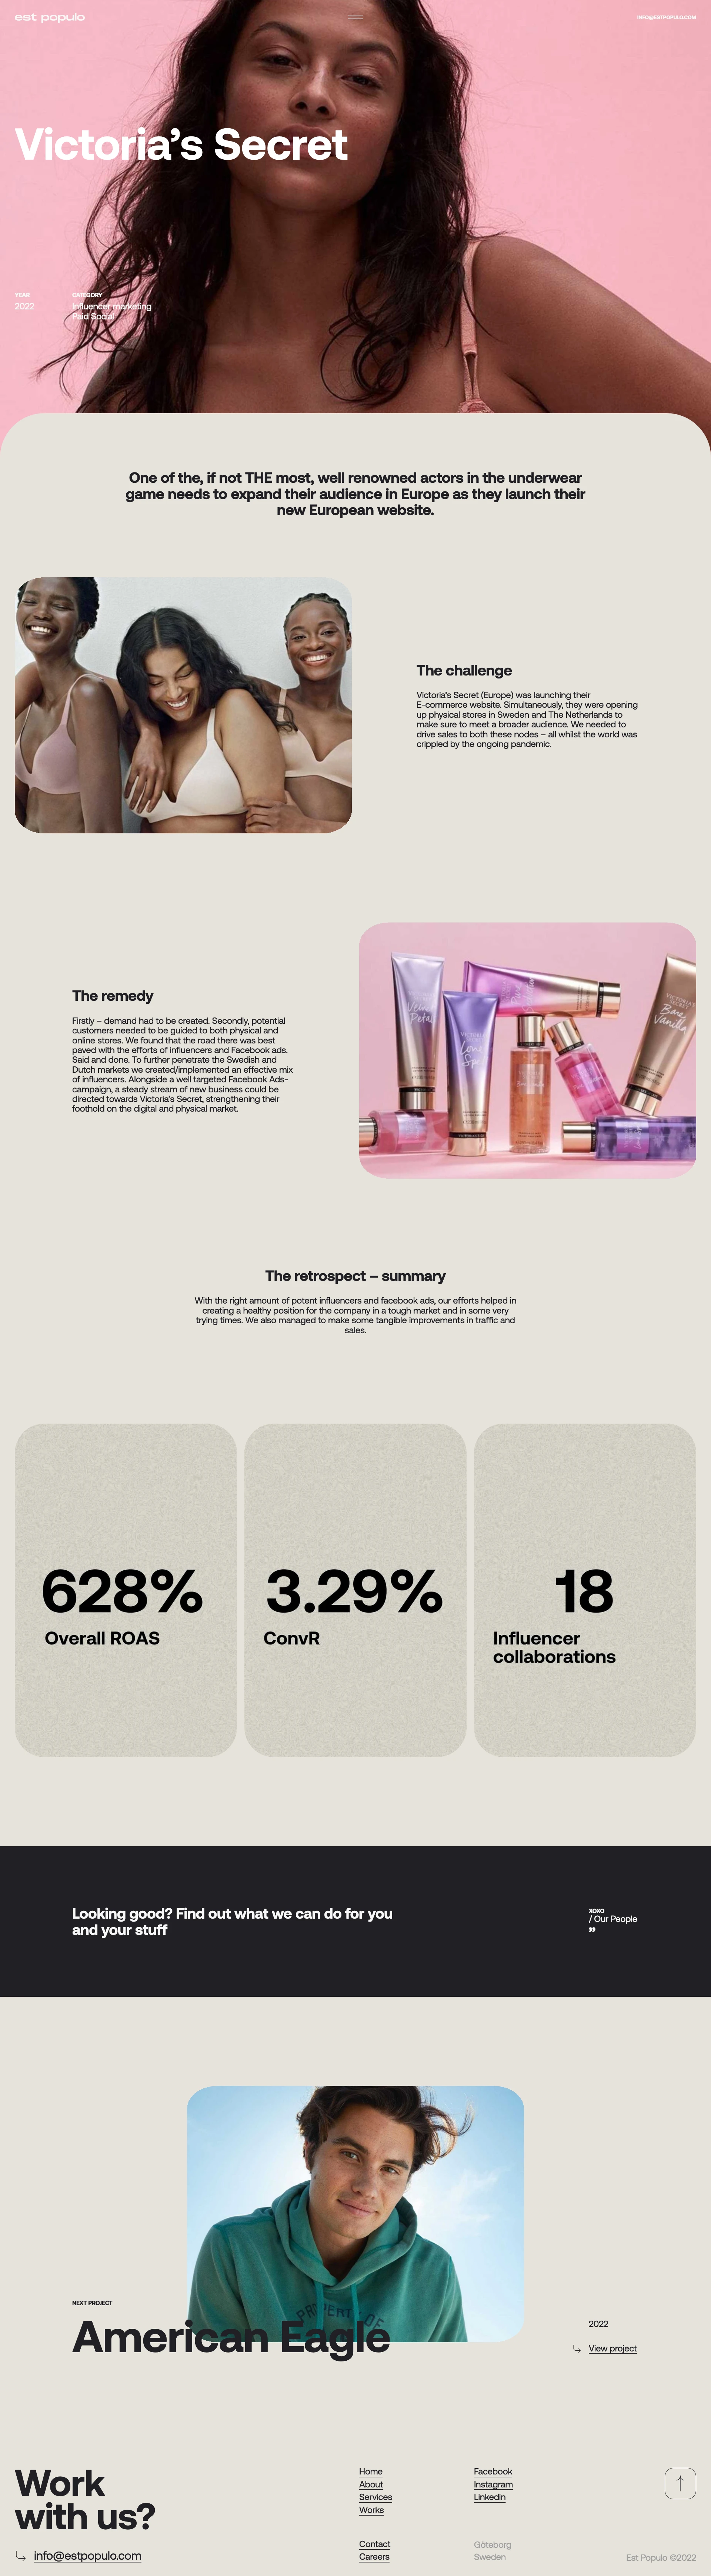 EST POPULO Landing Page Example: This company sprung from frustration with an agency system that is obsessed with counting hours rather than actually improving results. When your old agency was busy hatching pretentious visions, we were probably busy doing some actual work.